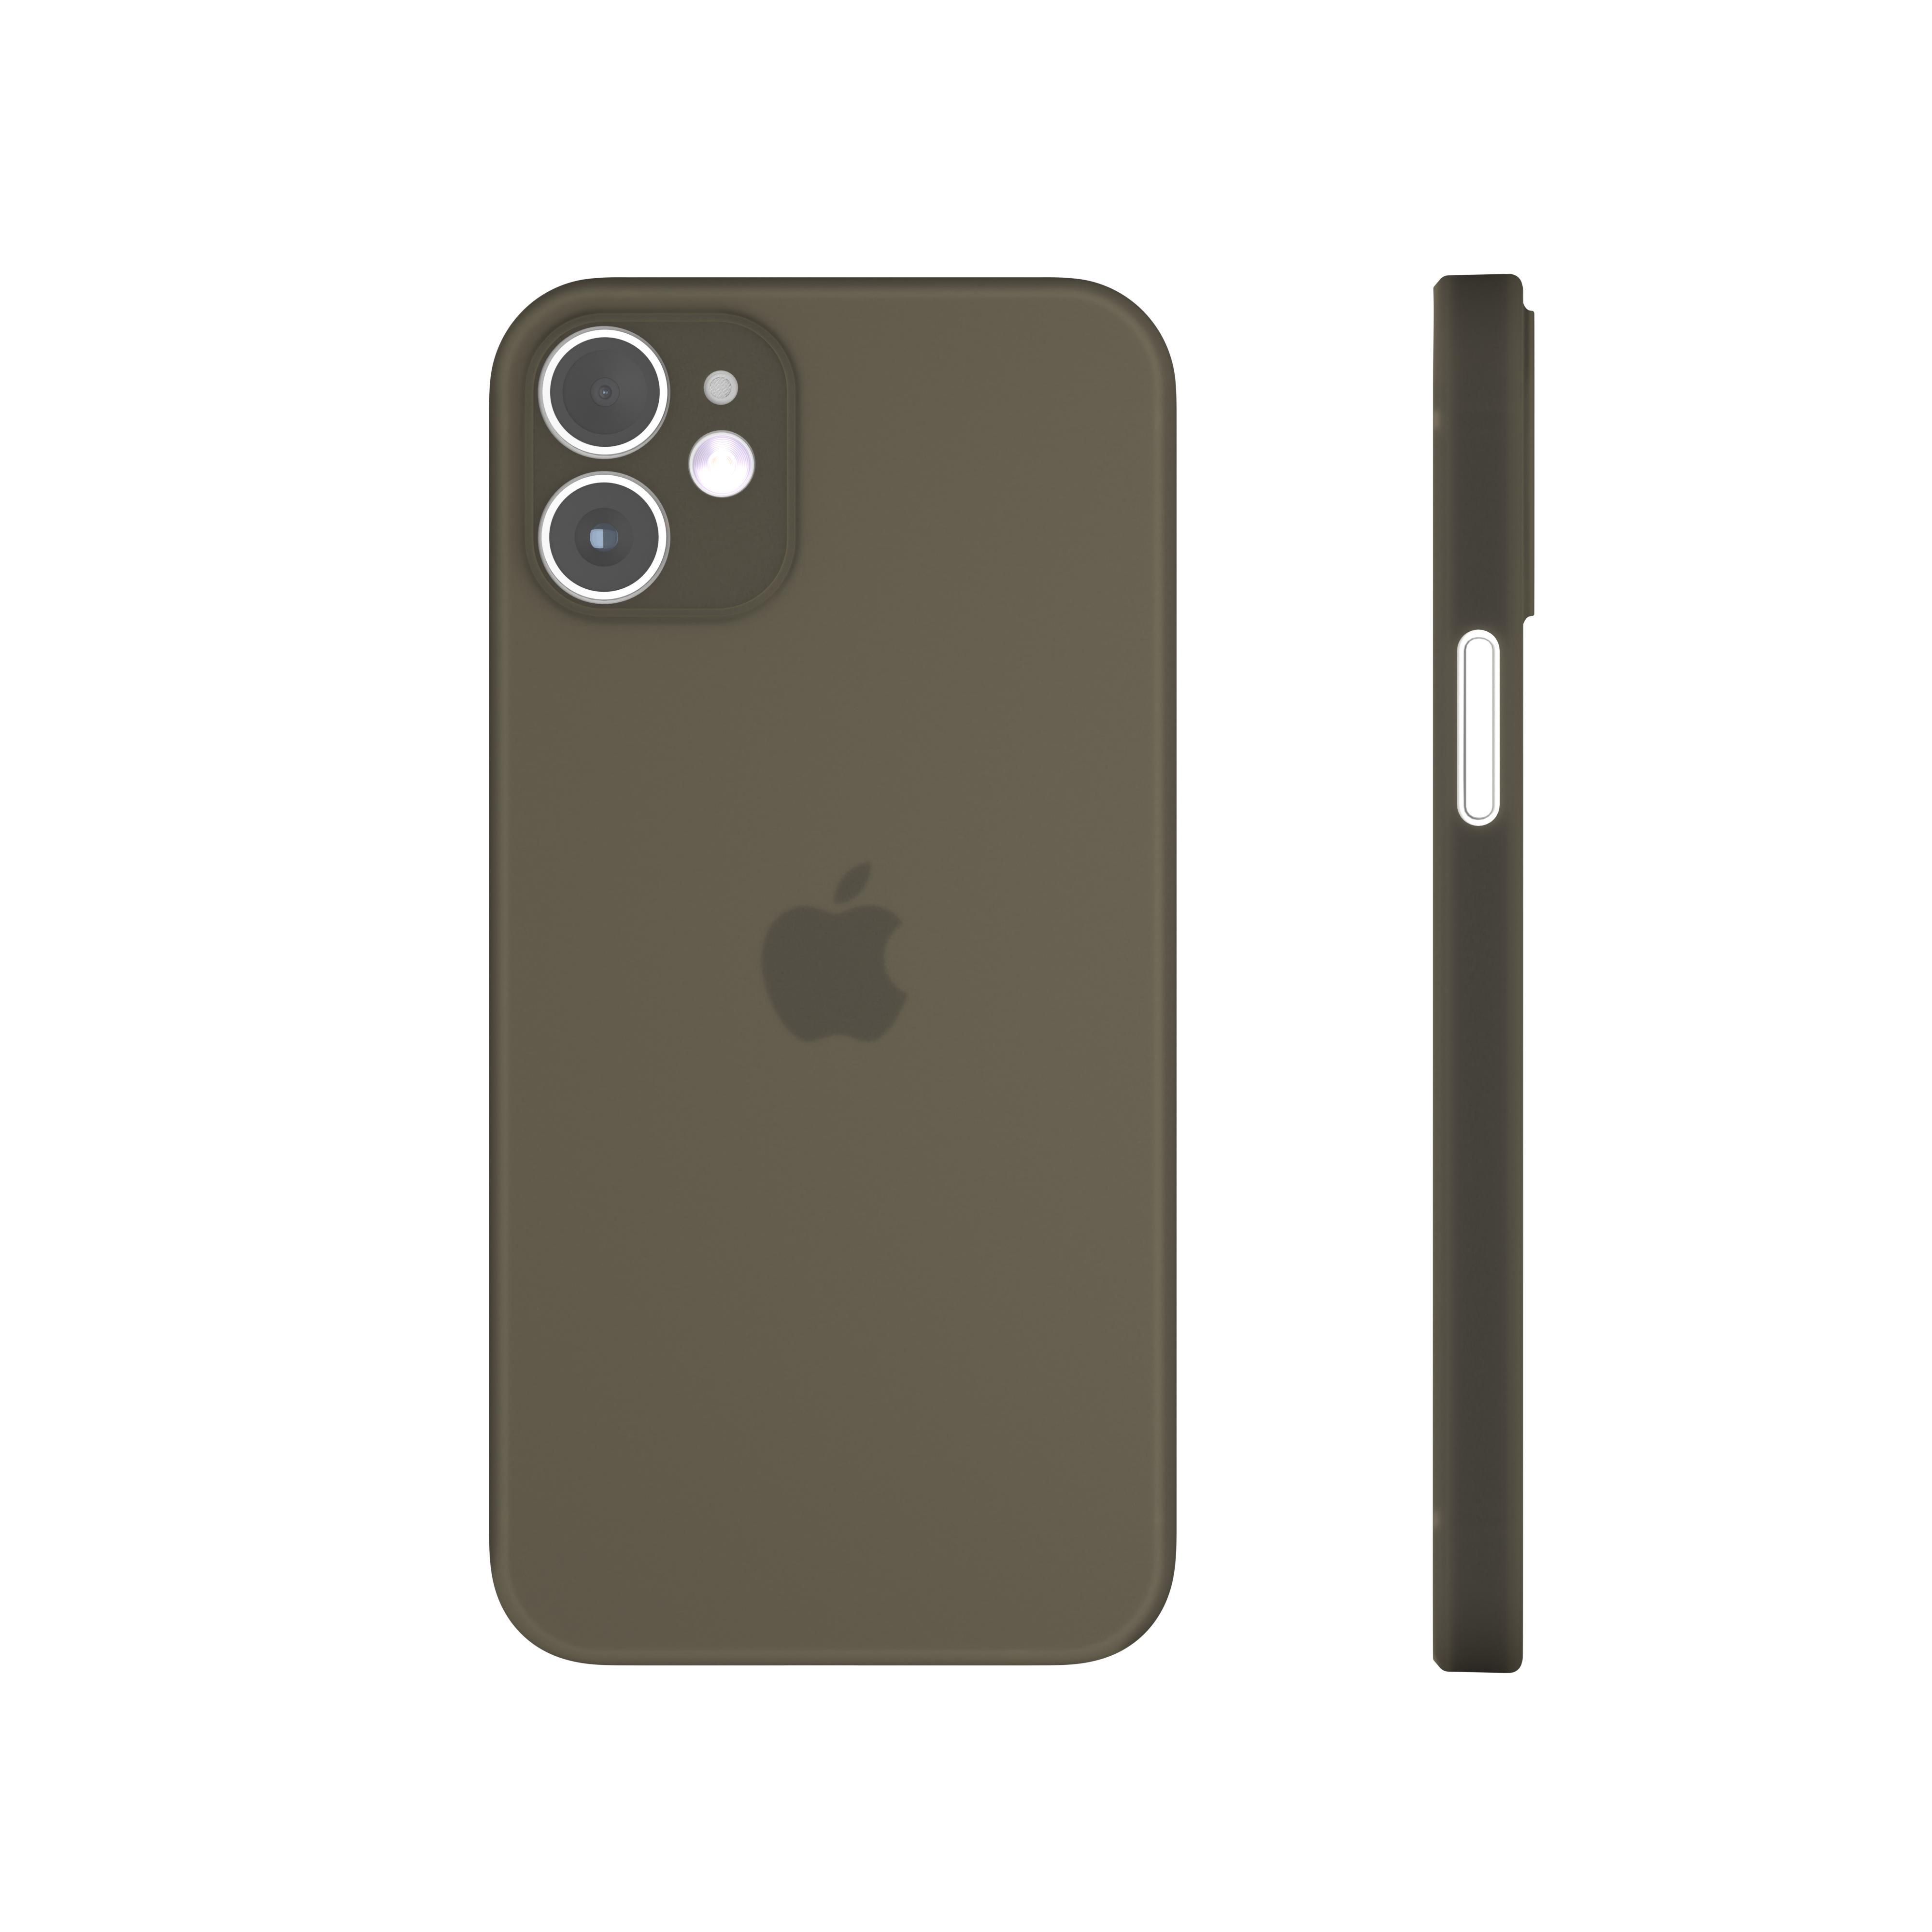 Slimcase for iPhone 11